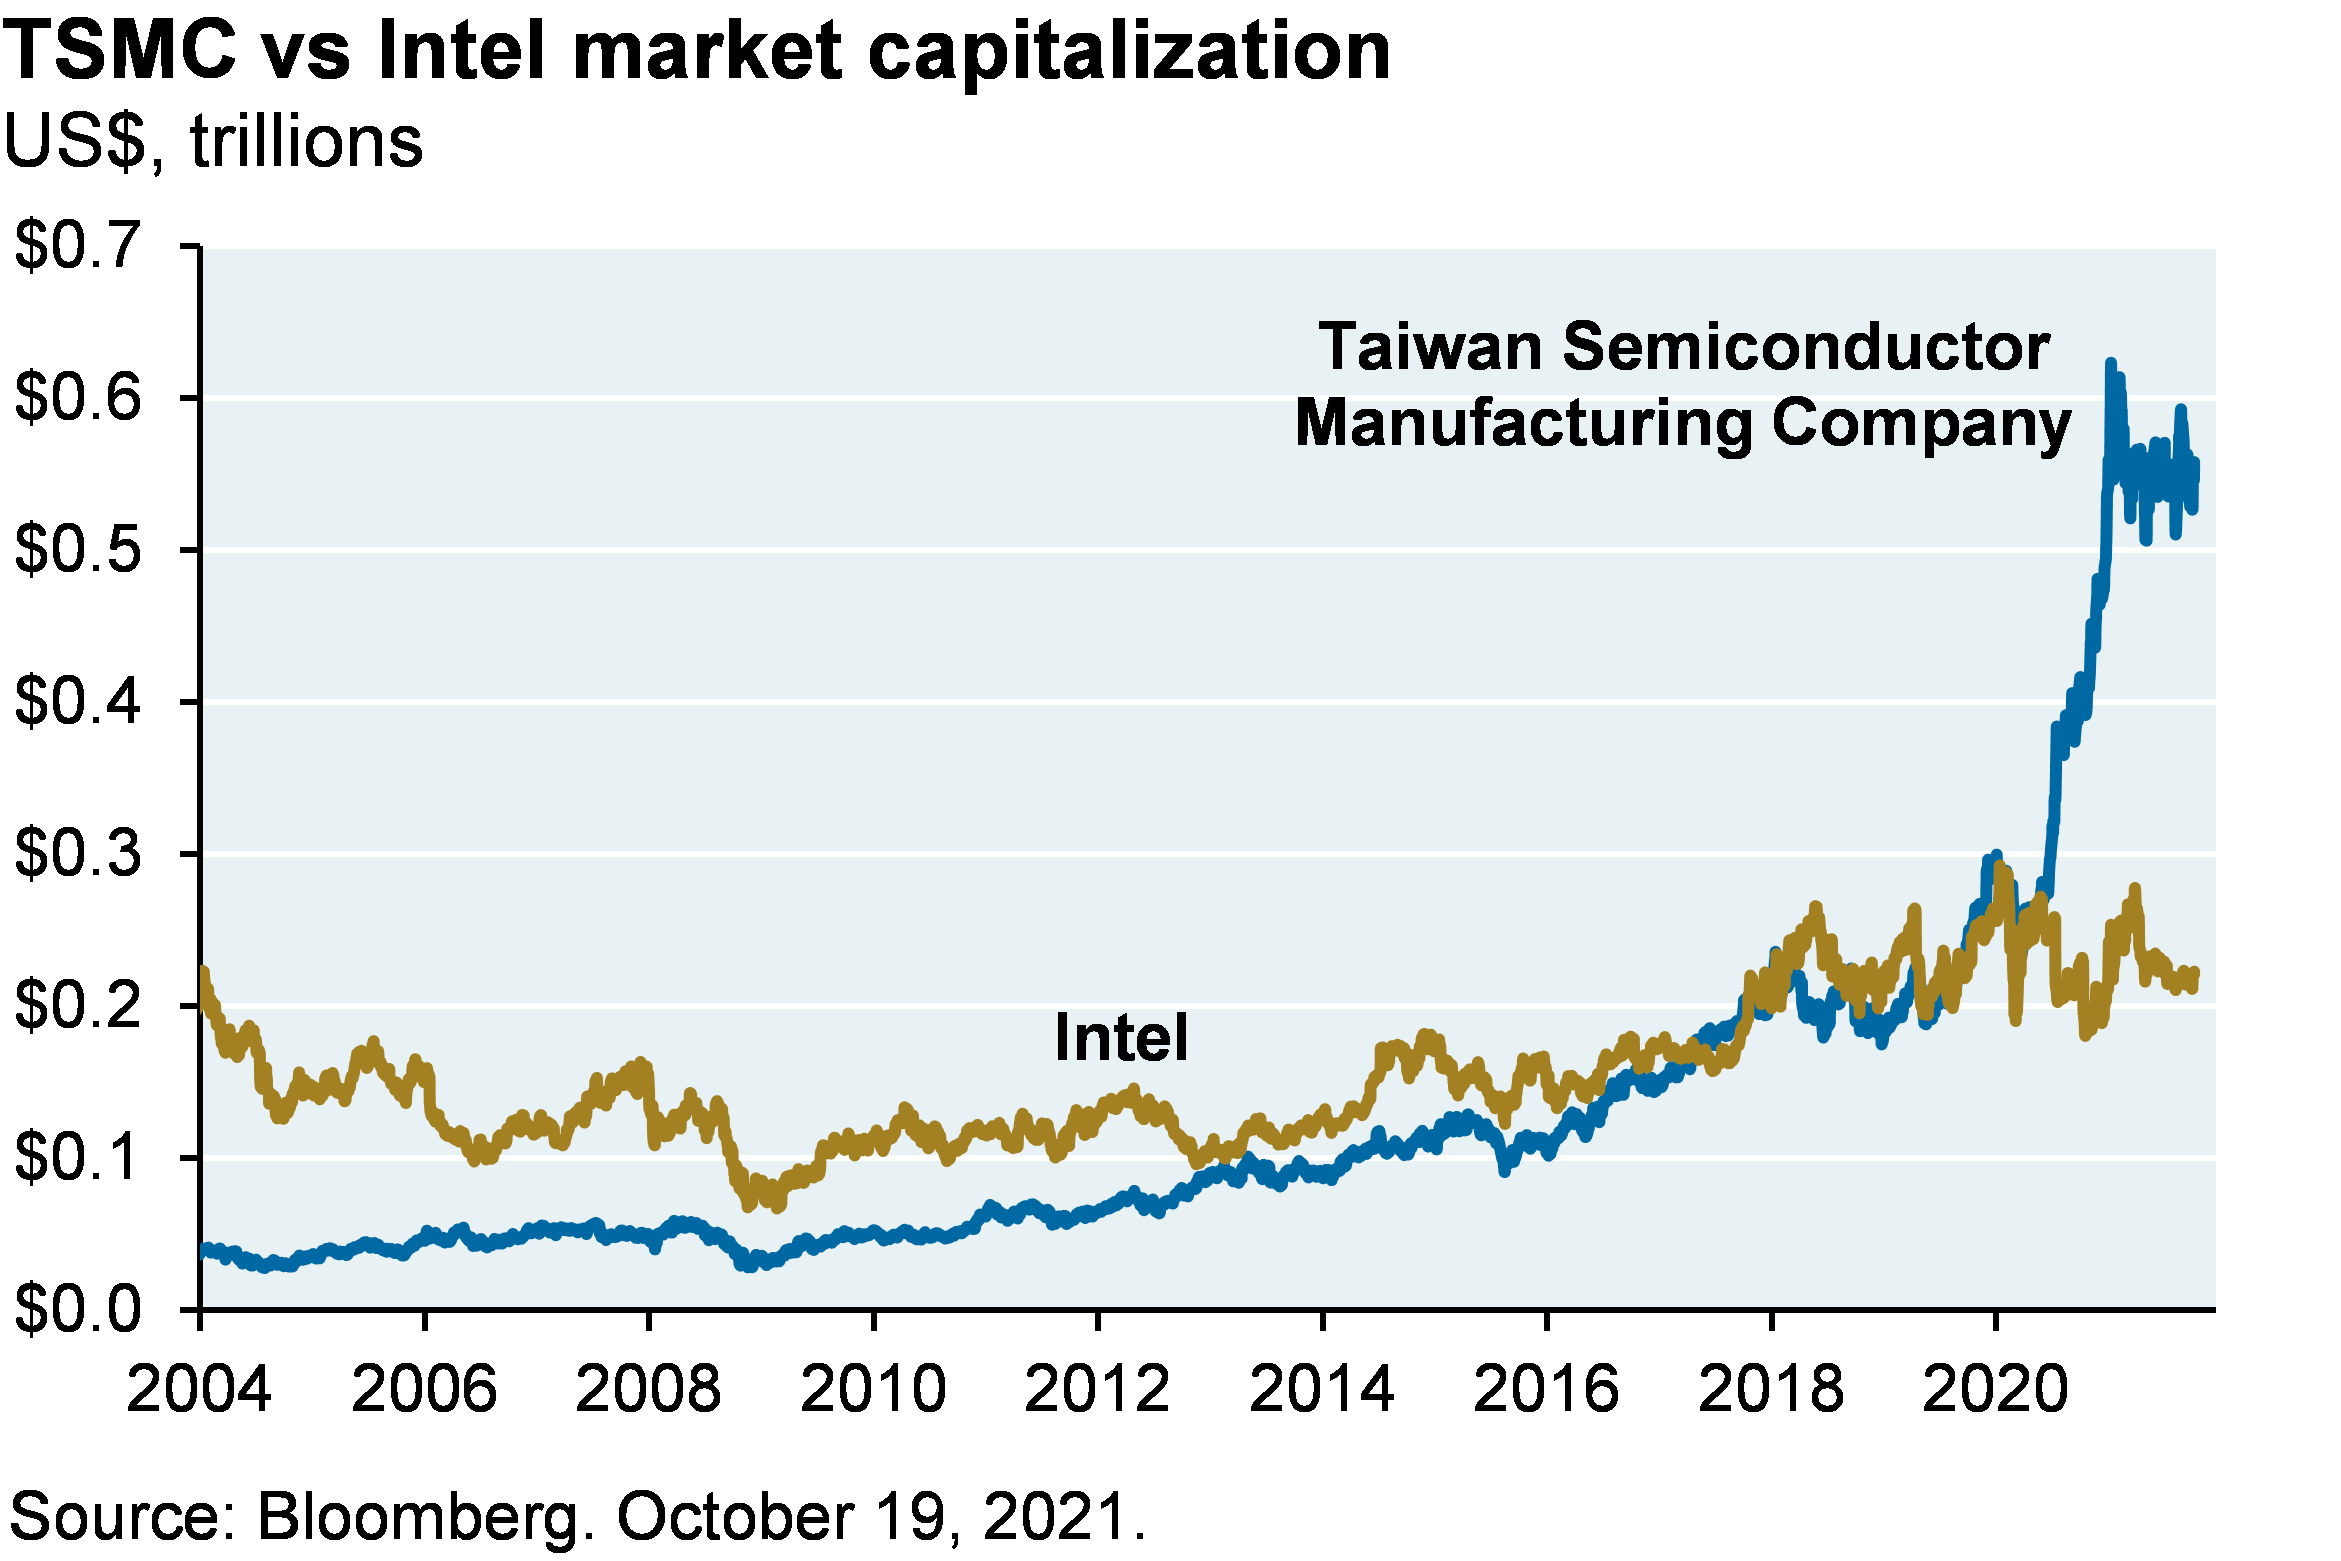 Line chart which shows the market capitalization of Taiwan Semiconductor Manufacturing Company and Intel since 2004. In 2004, Intel was 5x larger than TSMC. However, since then TSMC has grown much faster than Intel and the two companies has similar market caps in 2017. TSMCs market cap has tripled since 2007 to more than half a trillion dollars, more than double that of Intel.